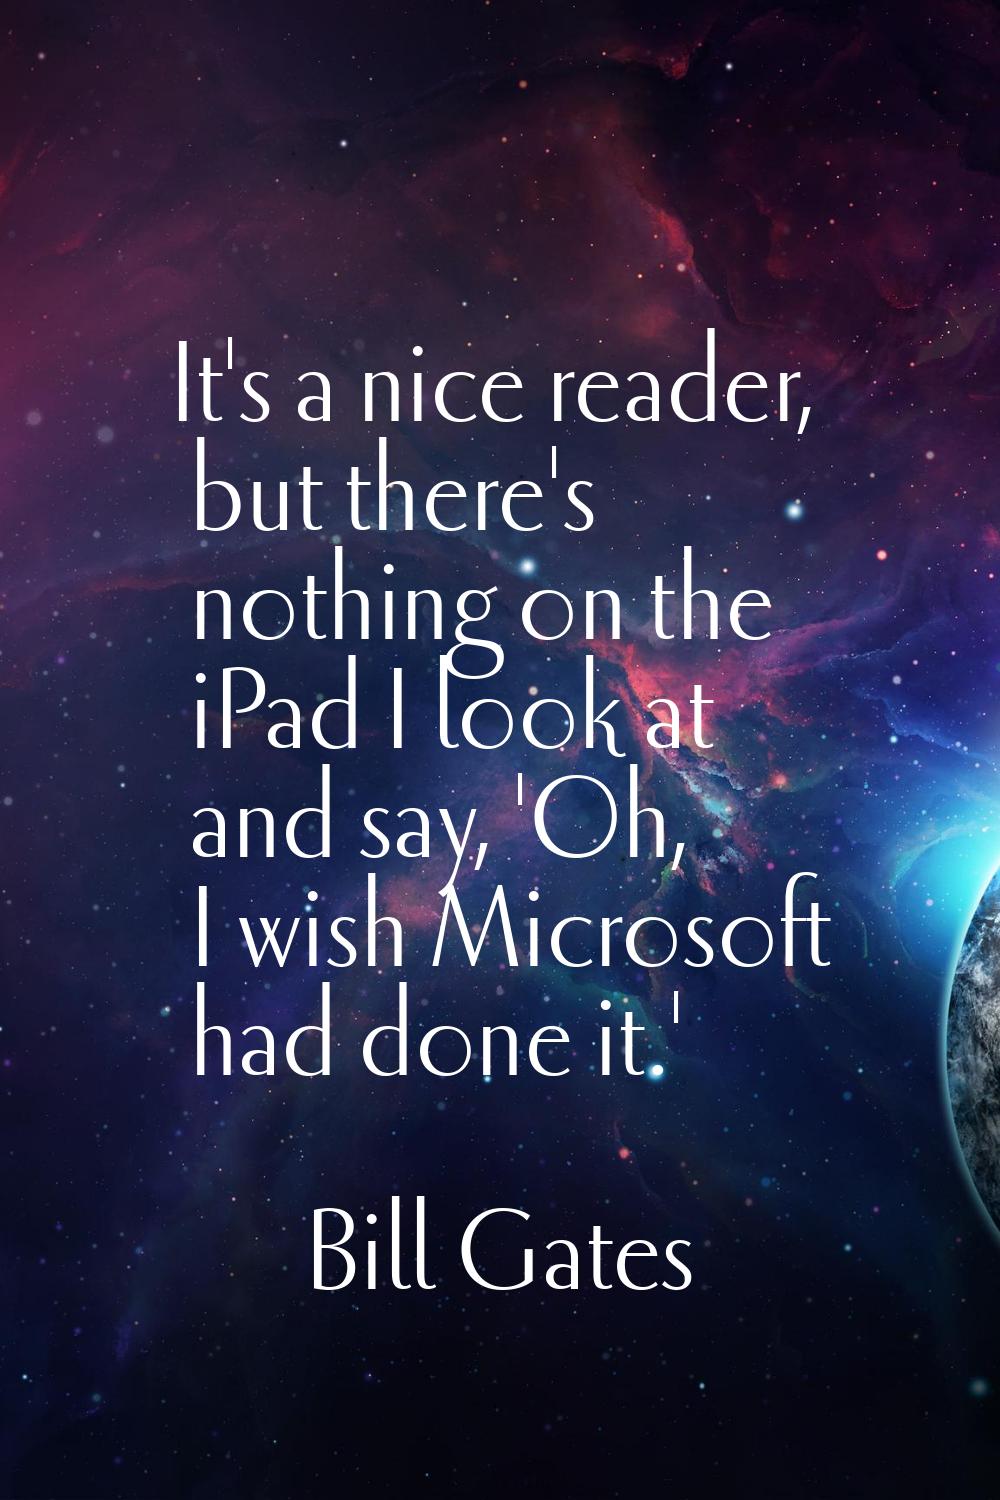 It's a nice reader, but there's nothing on the iPad I look at and say, 'Oh, I wish Microsoft had do